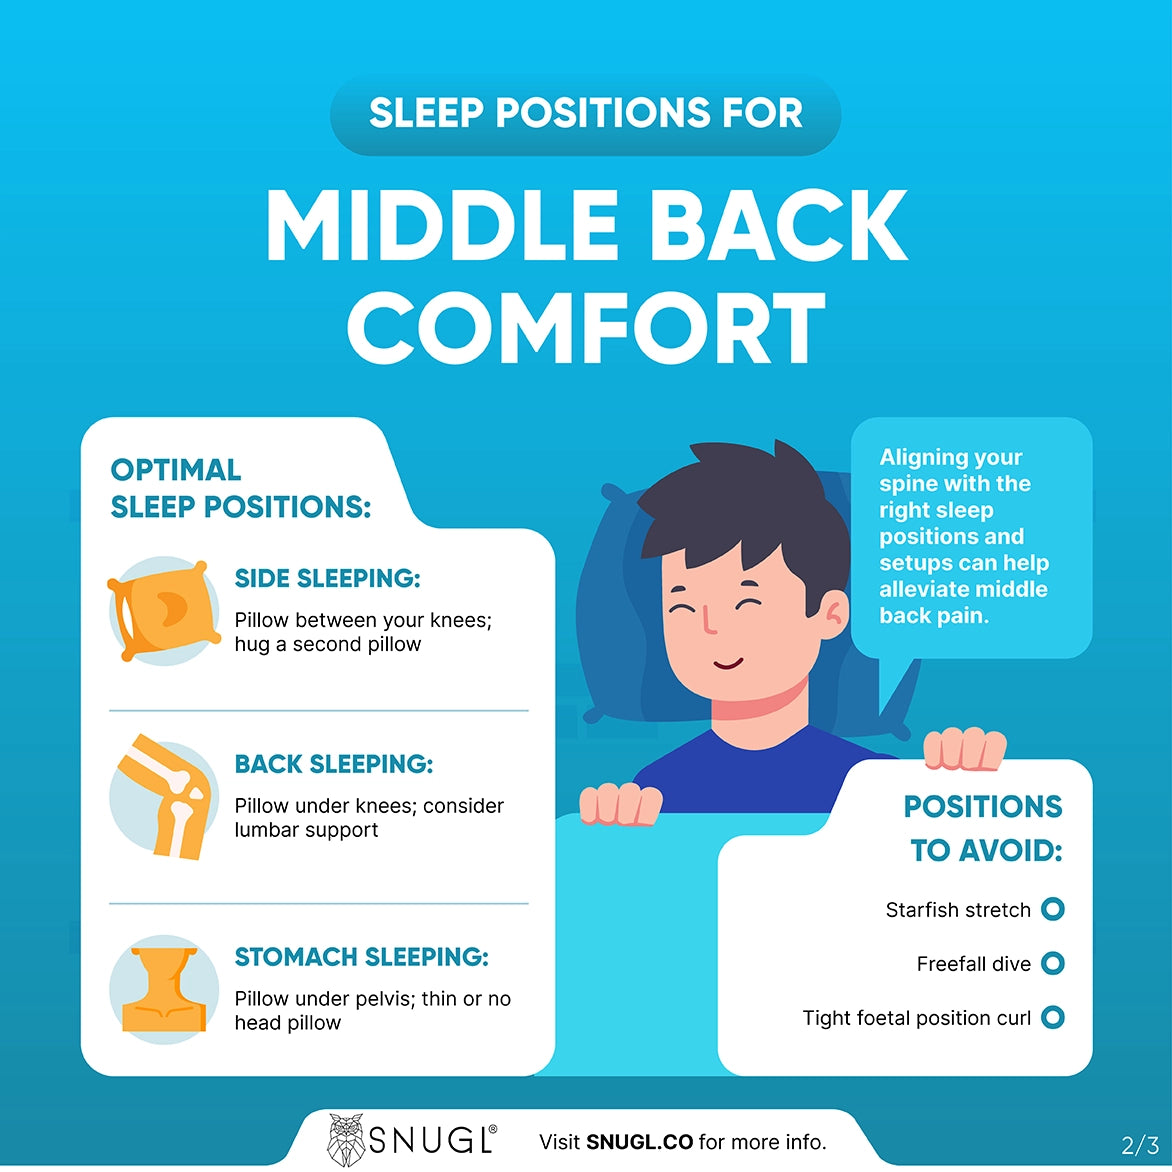 sleep positions for middle back comfort